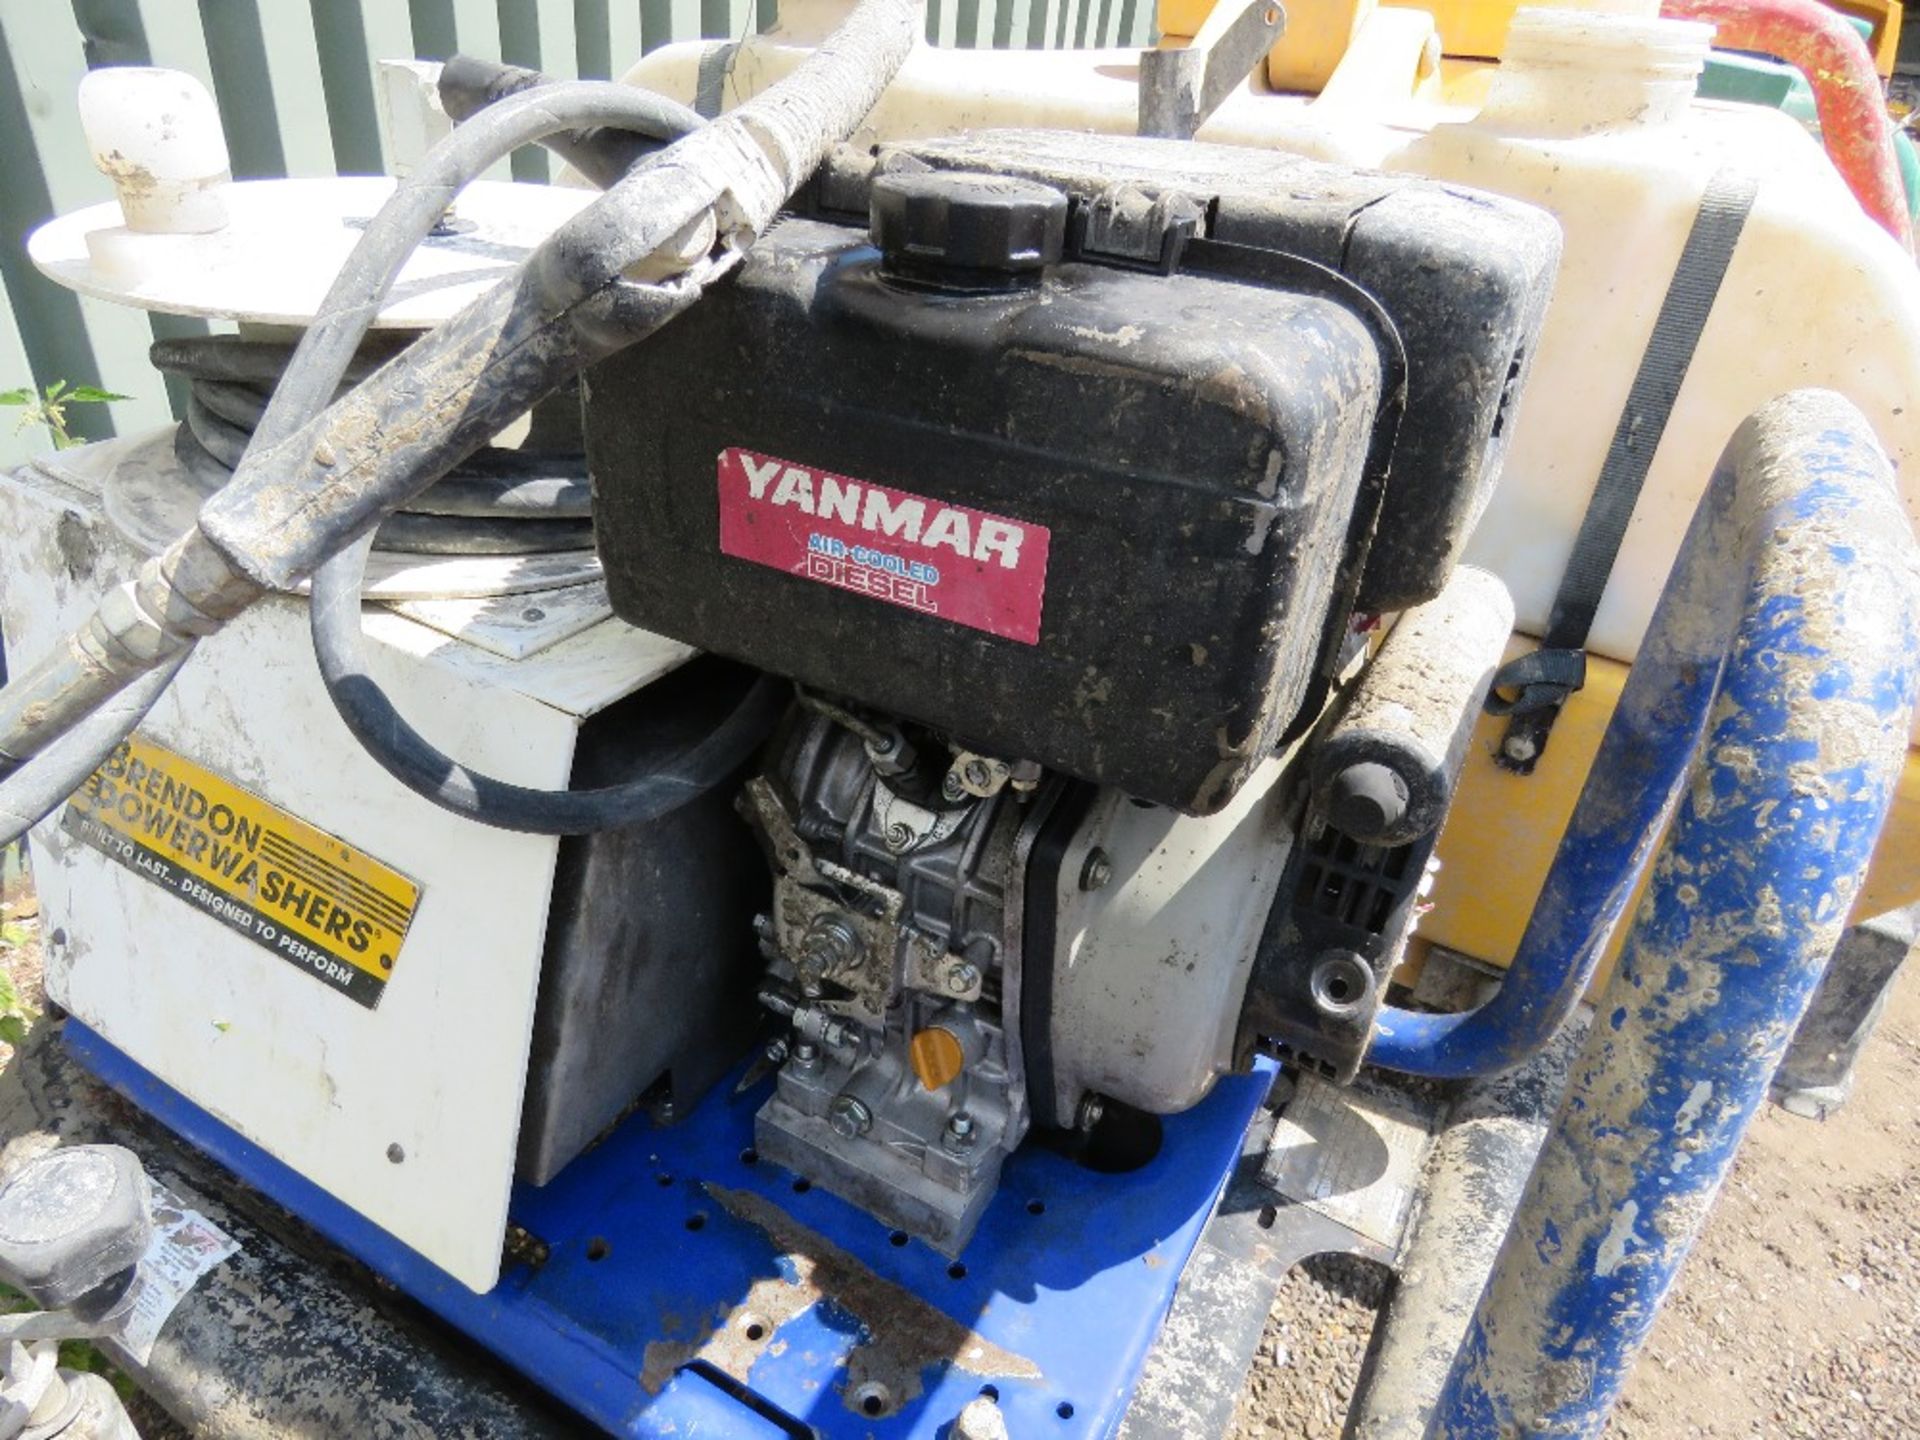 BRENDON POWER WASHER BOWSER WITH YANMAR DIESEL PUMP. WHEN TESTED WAS SEEN TO RUN AND PUMP. - Image 6 of 13